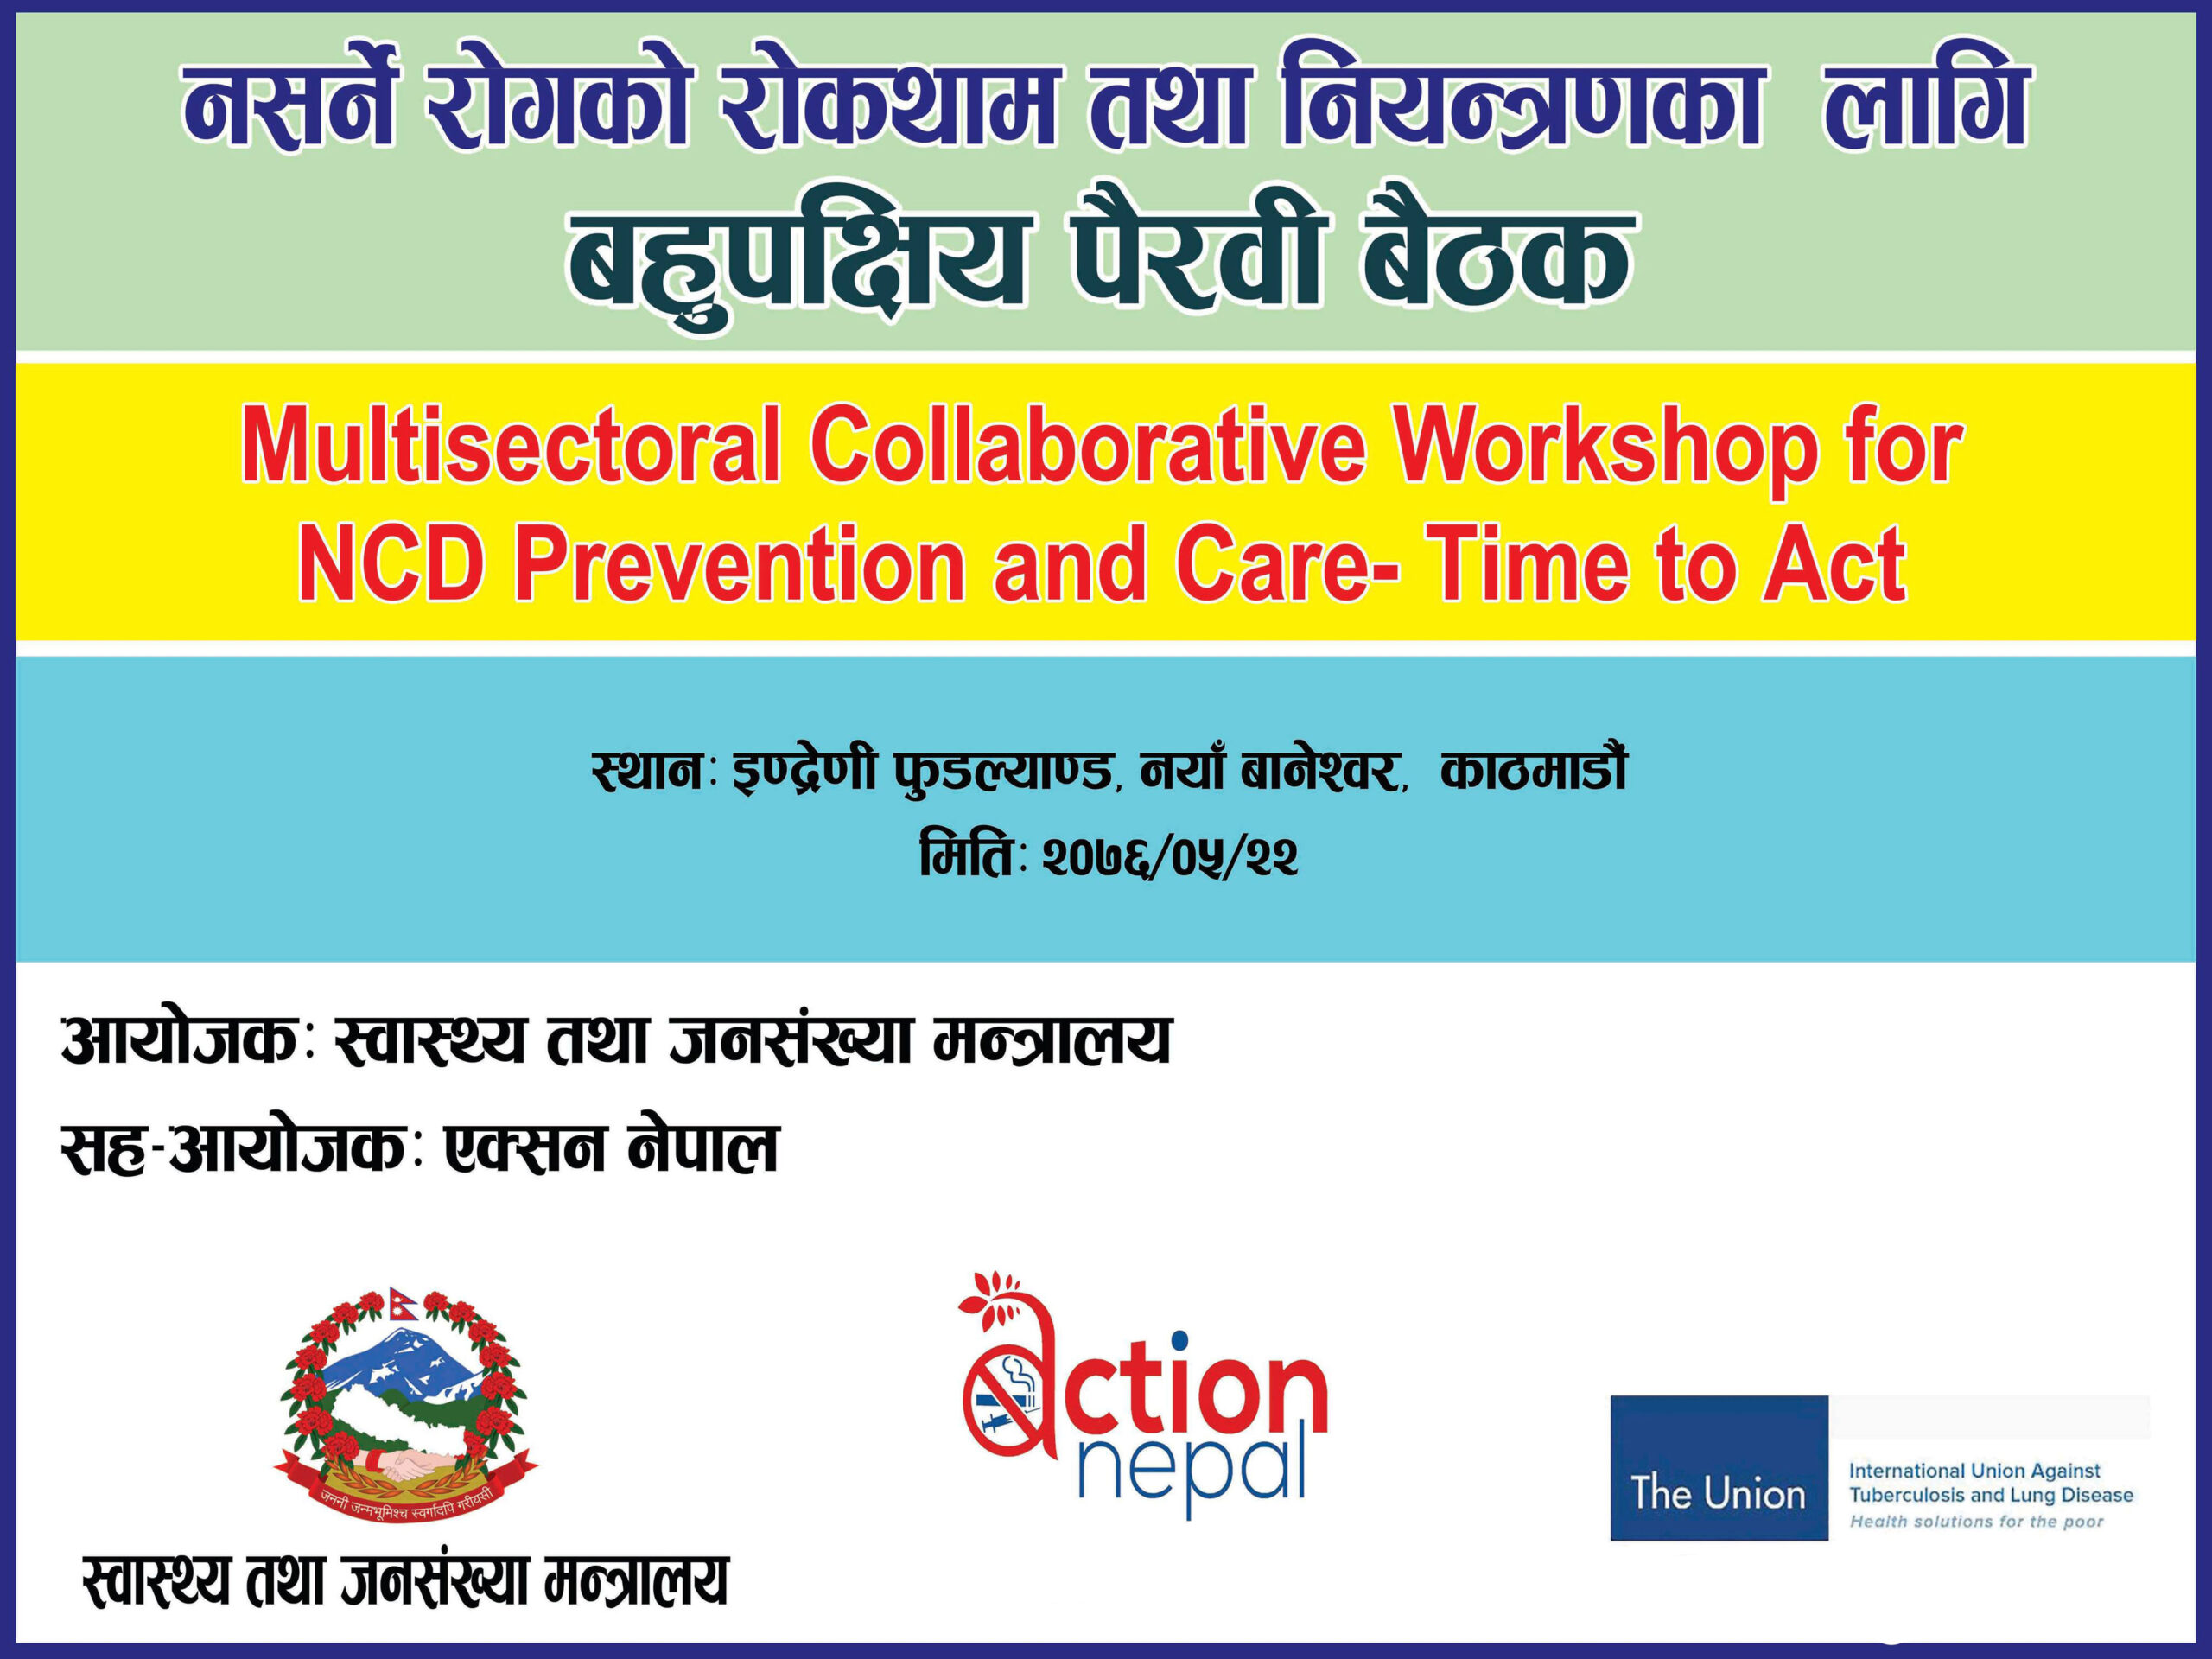 Multisectoral Collaborative Workshop: NCD Prevention and Care